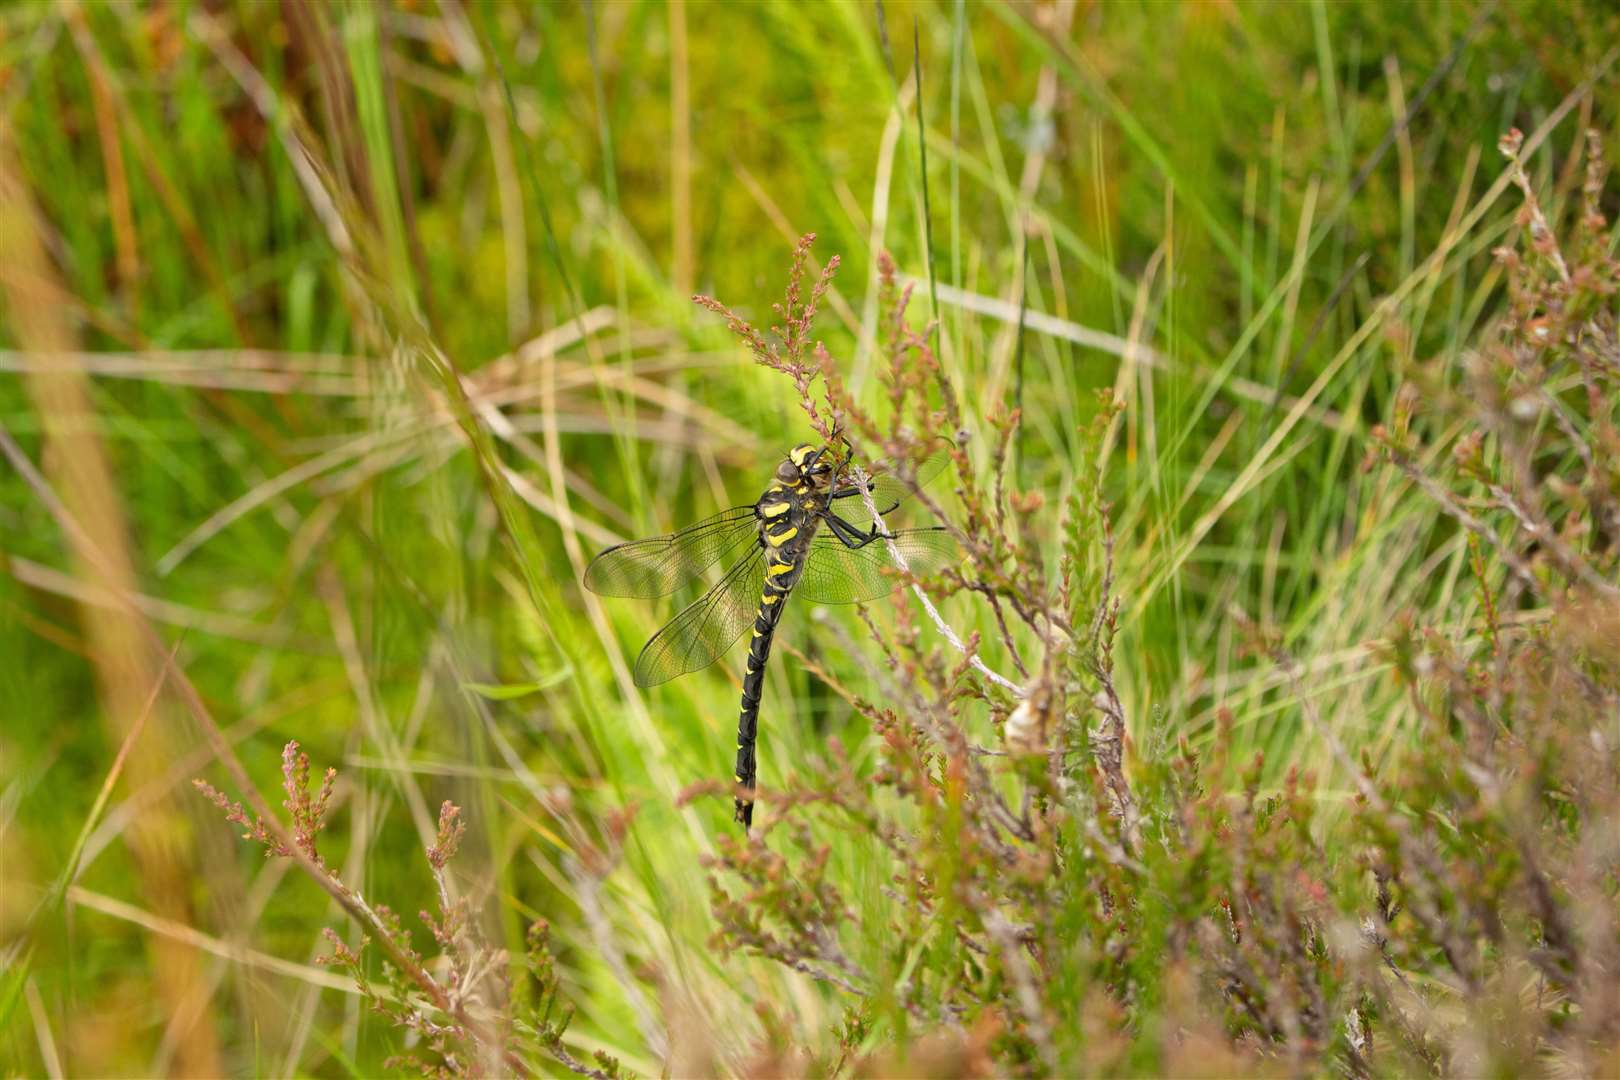 Golden-ringed dragonfly seen on heather beside the burn.